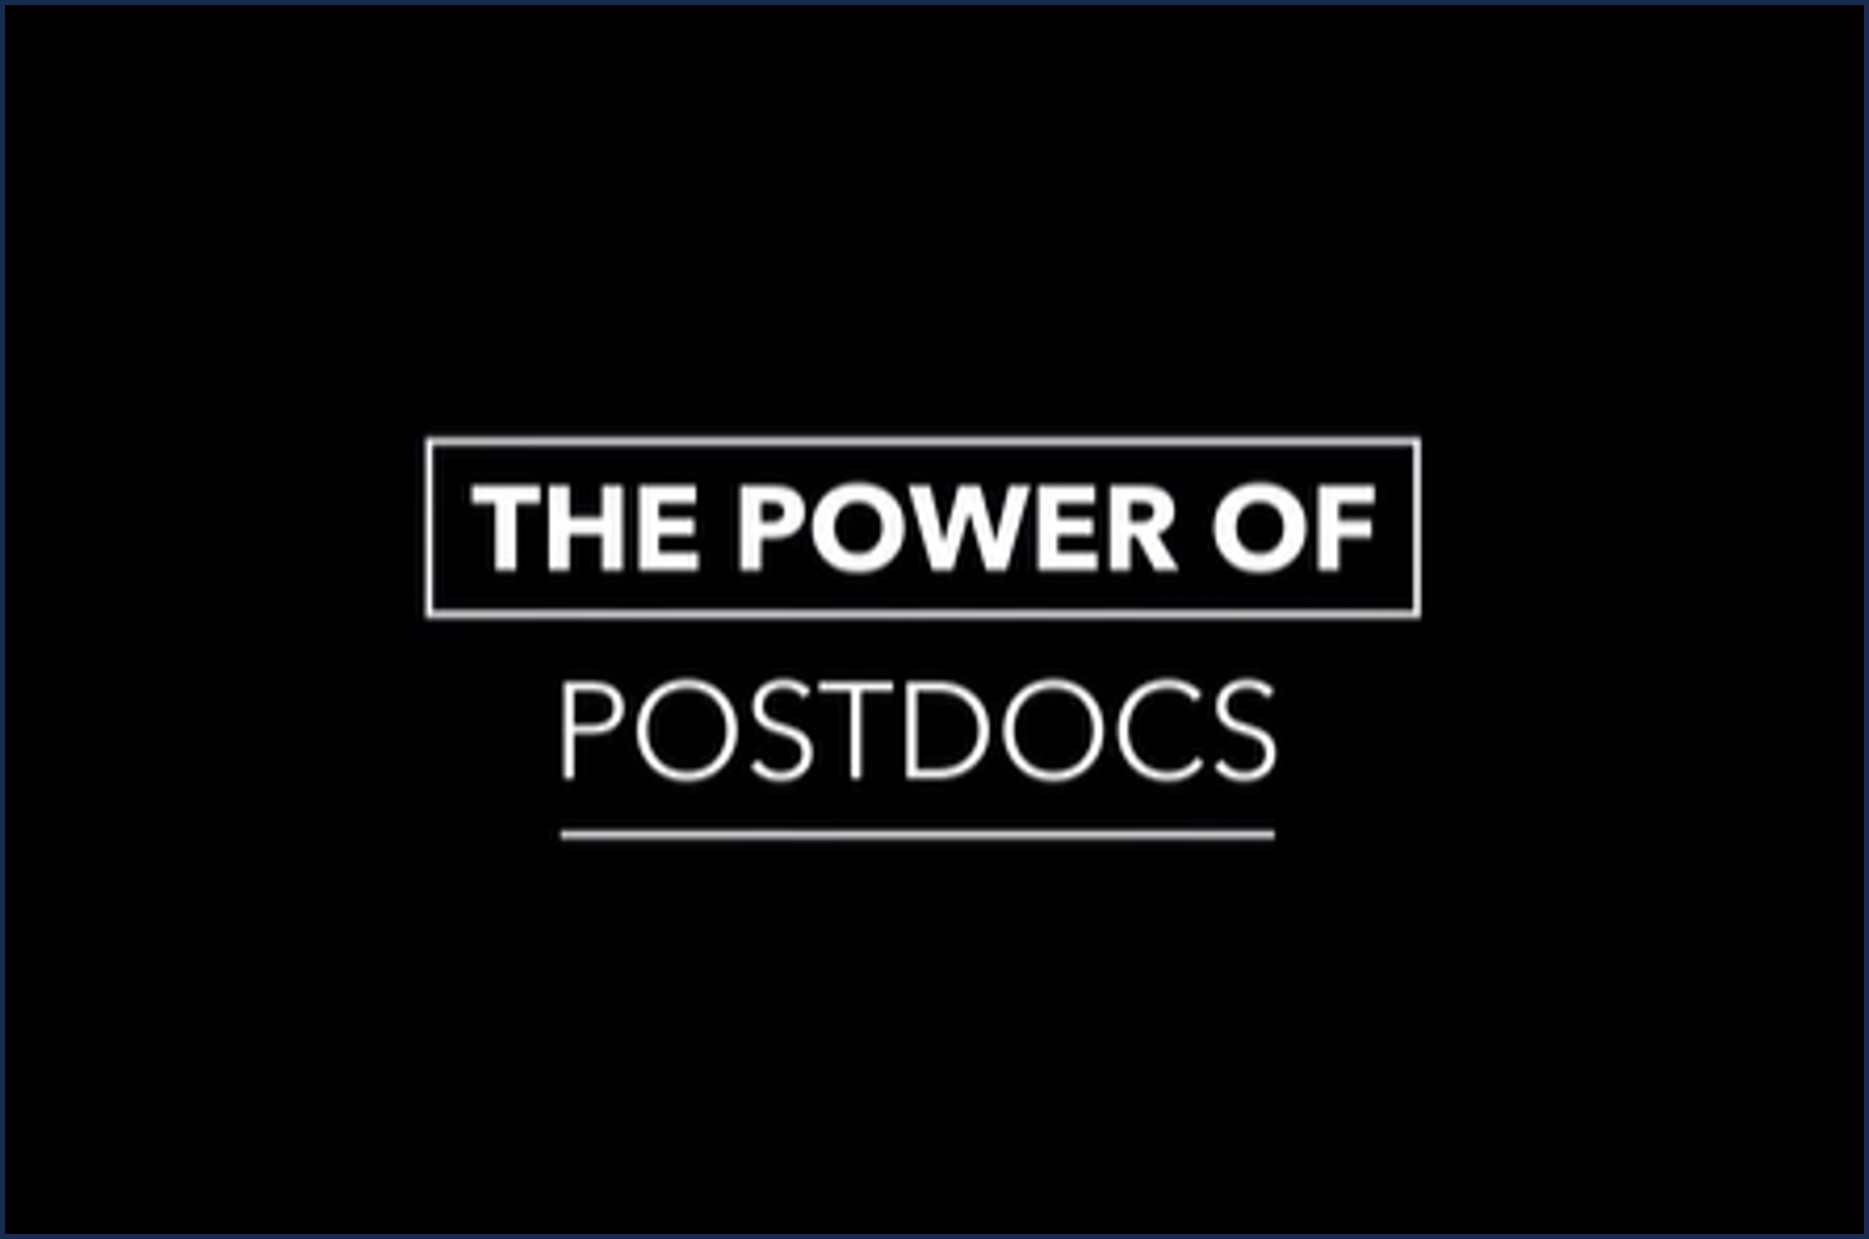 Image has a black background and white writing which reads The Power of Postdocs